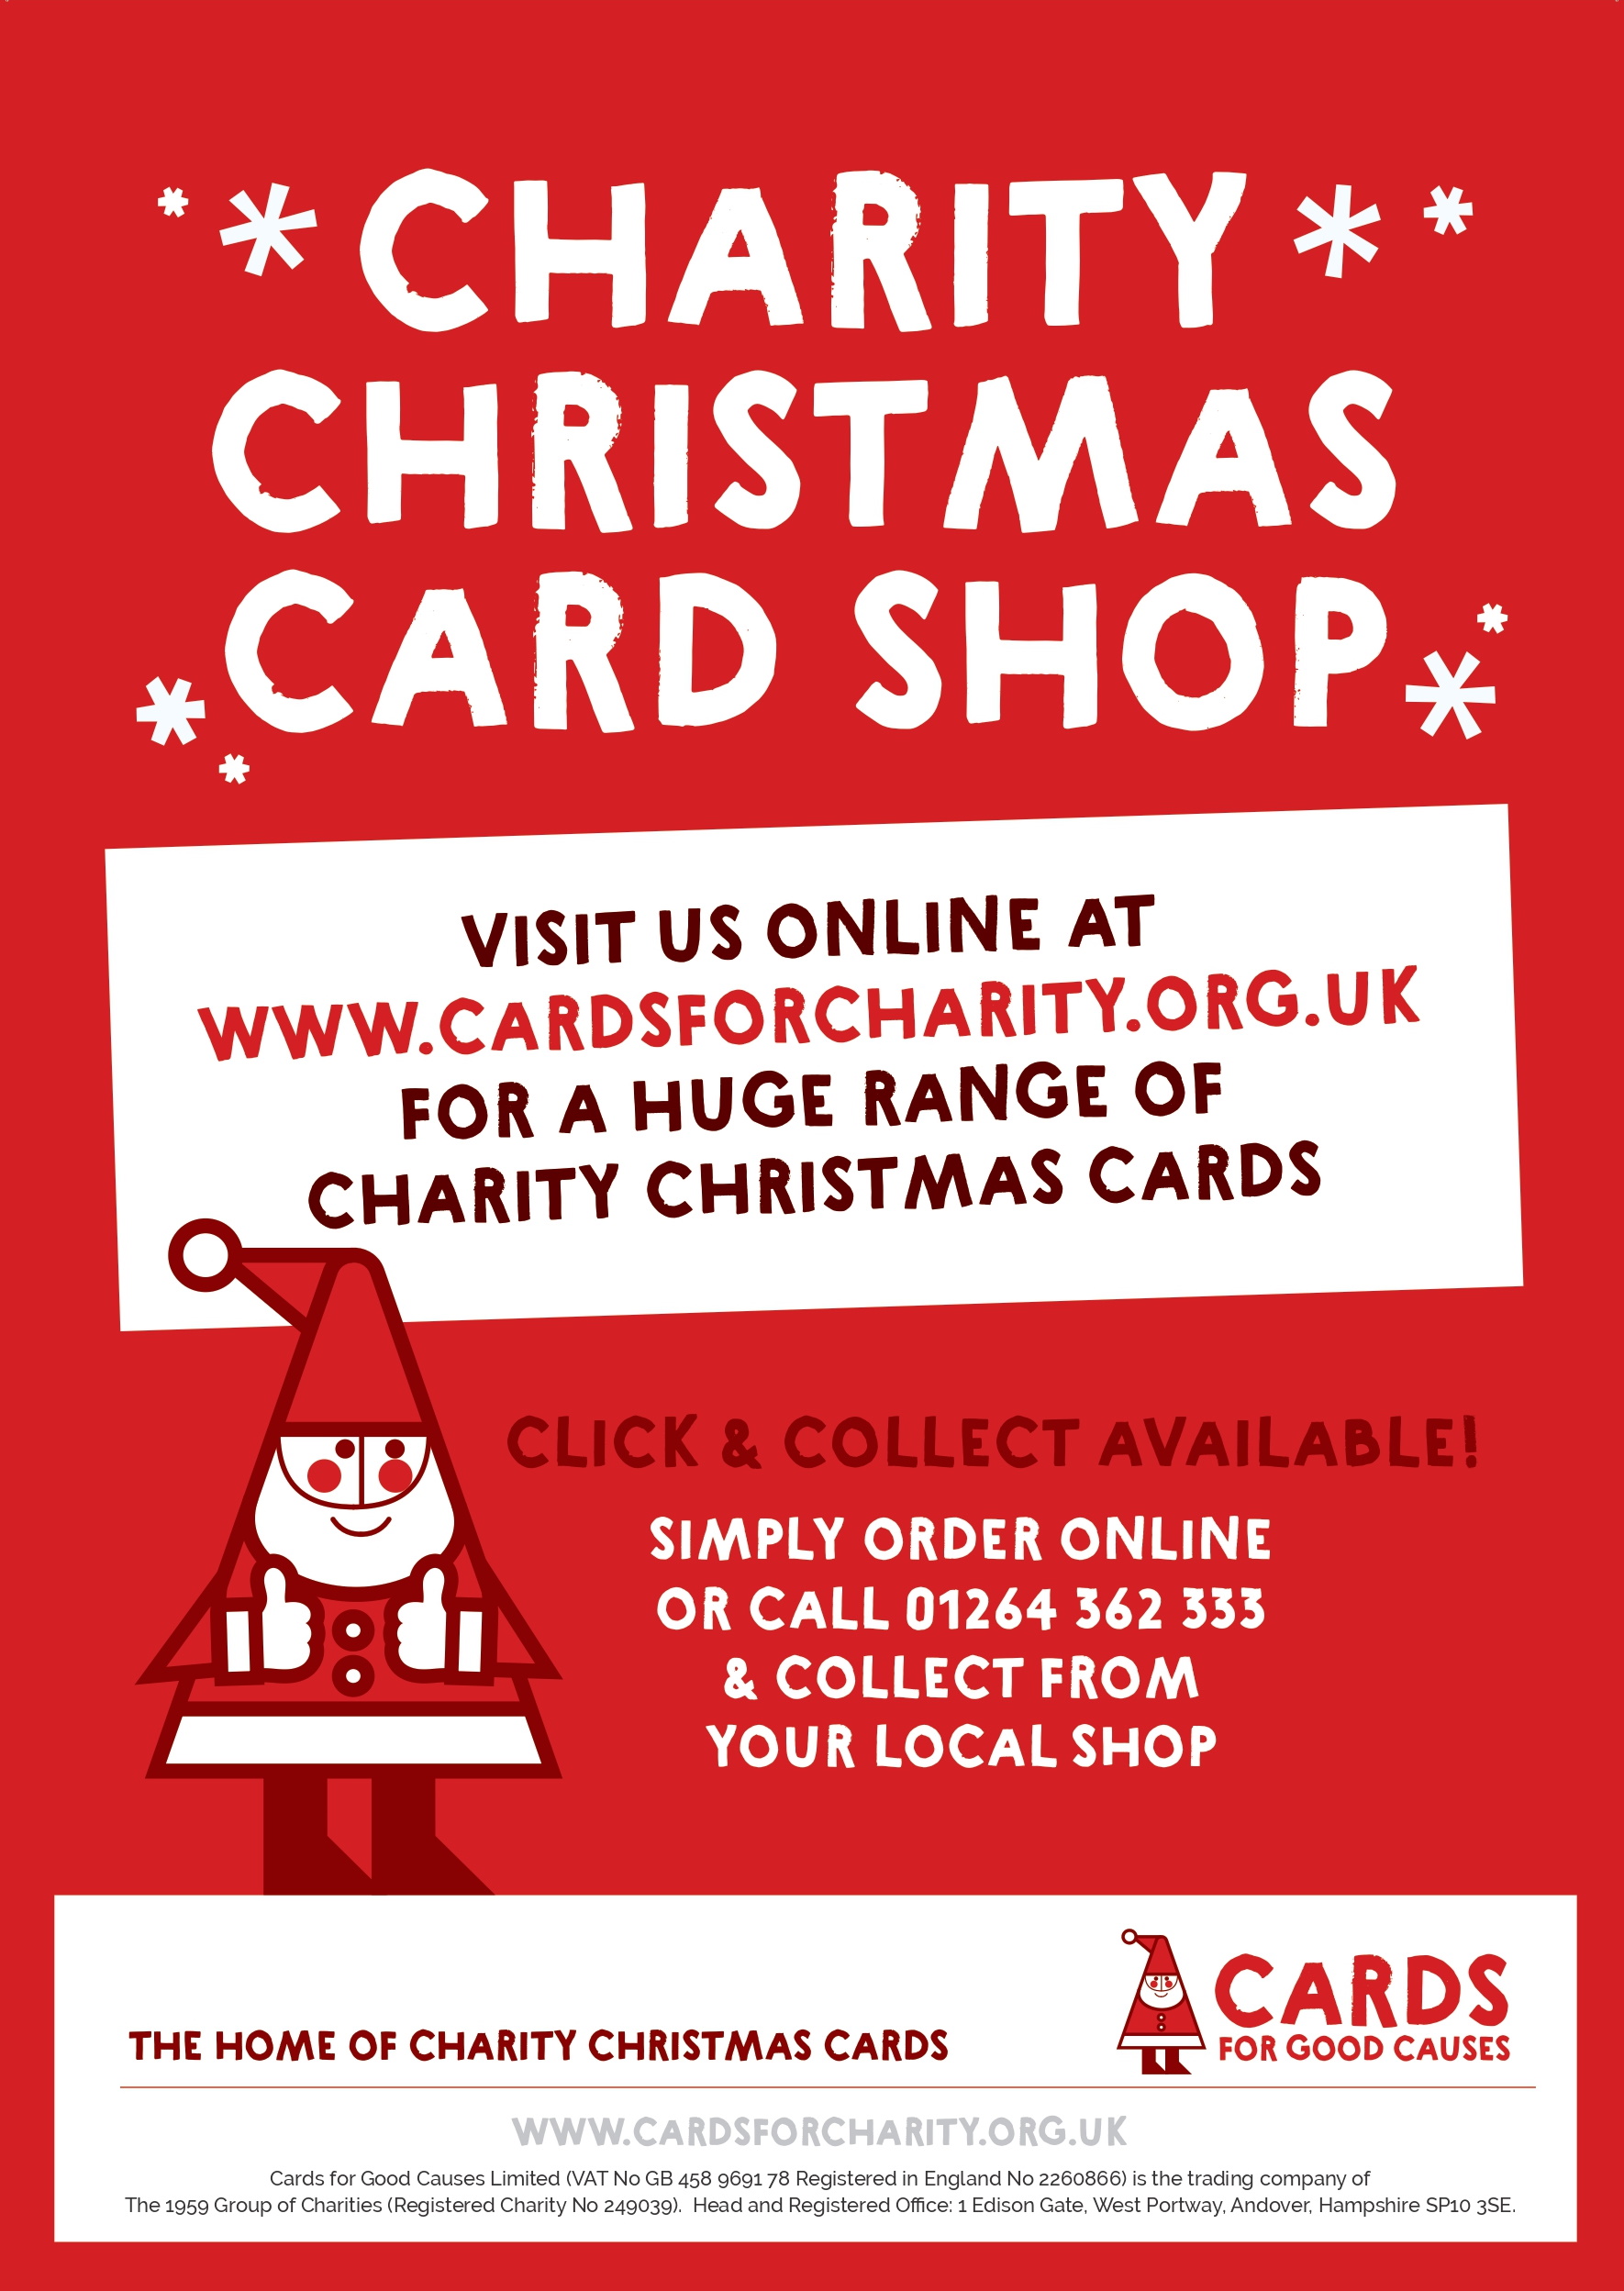 cards-for-good-causes-goes-click-and-collect-chichester-city-council